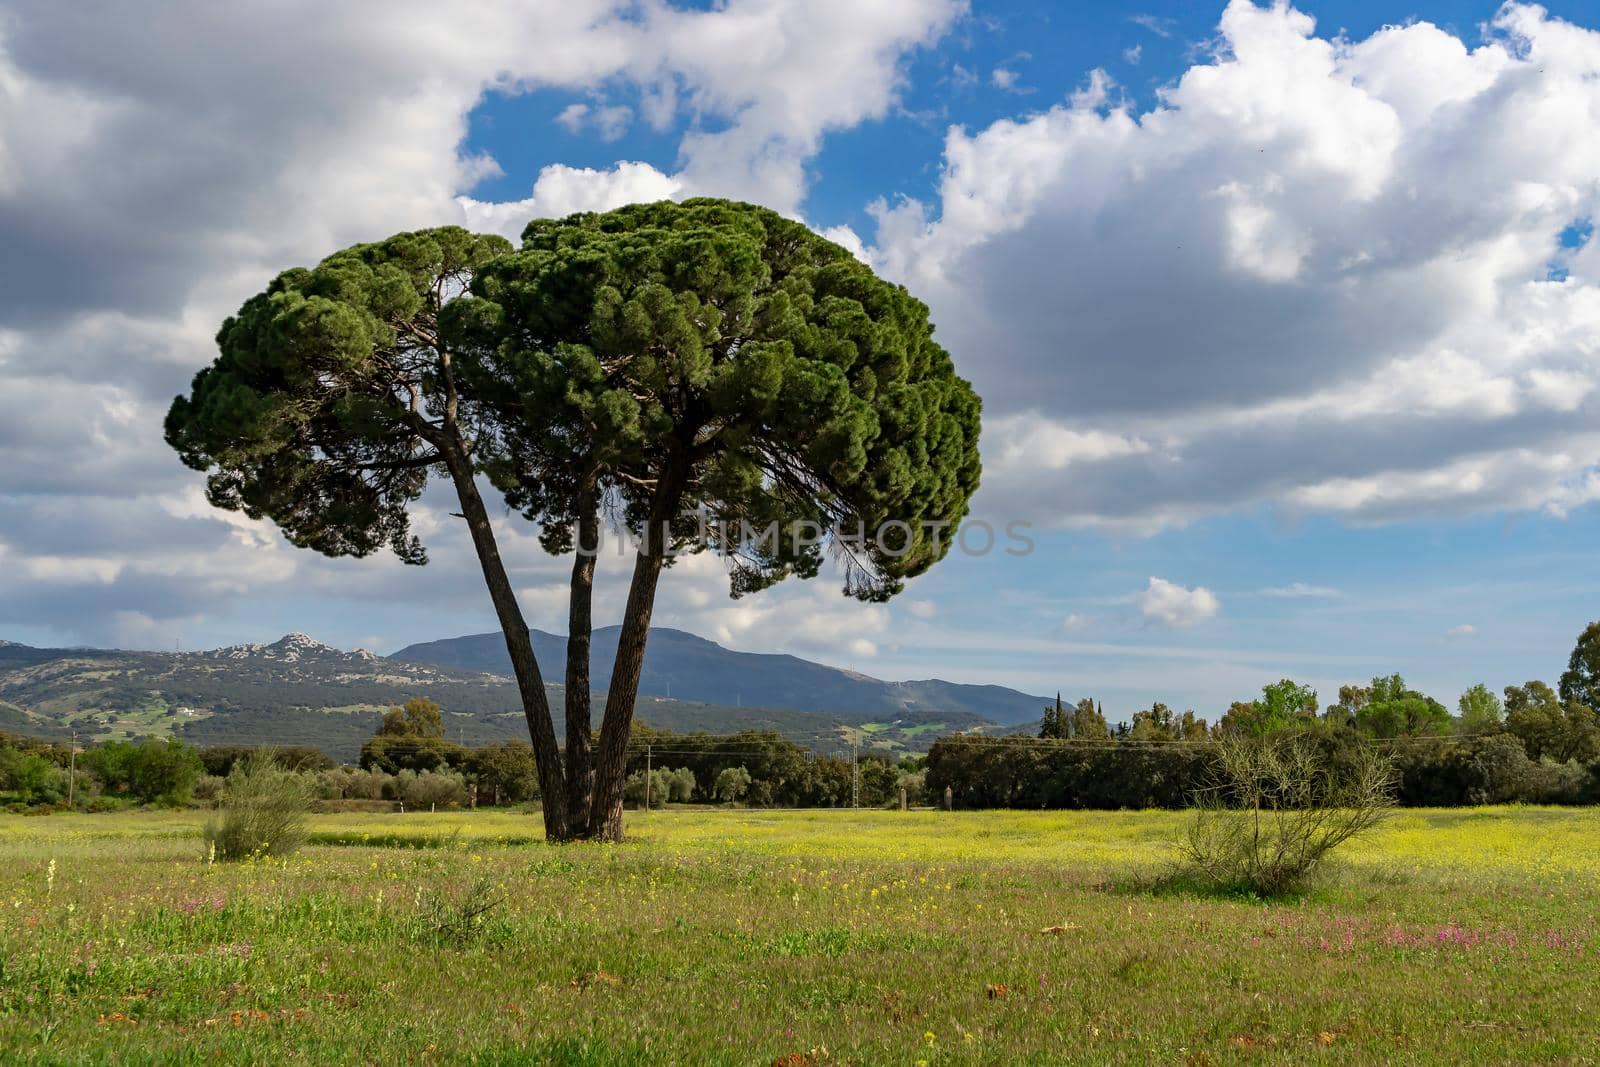 (Pinus pinea) stone pine in a green meadow with flowers, cloudy sky and mountain scenery in the background